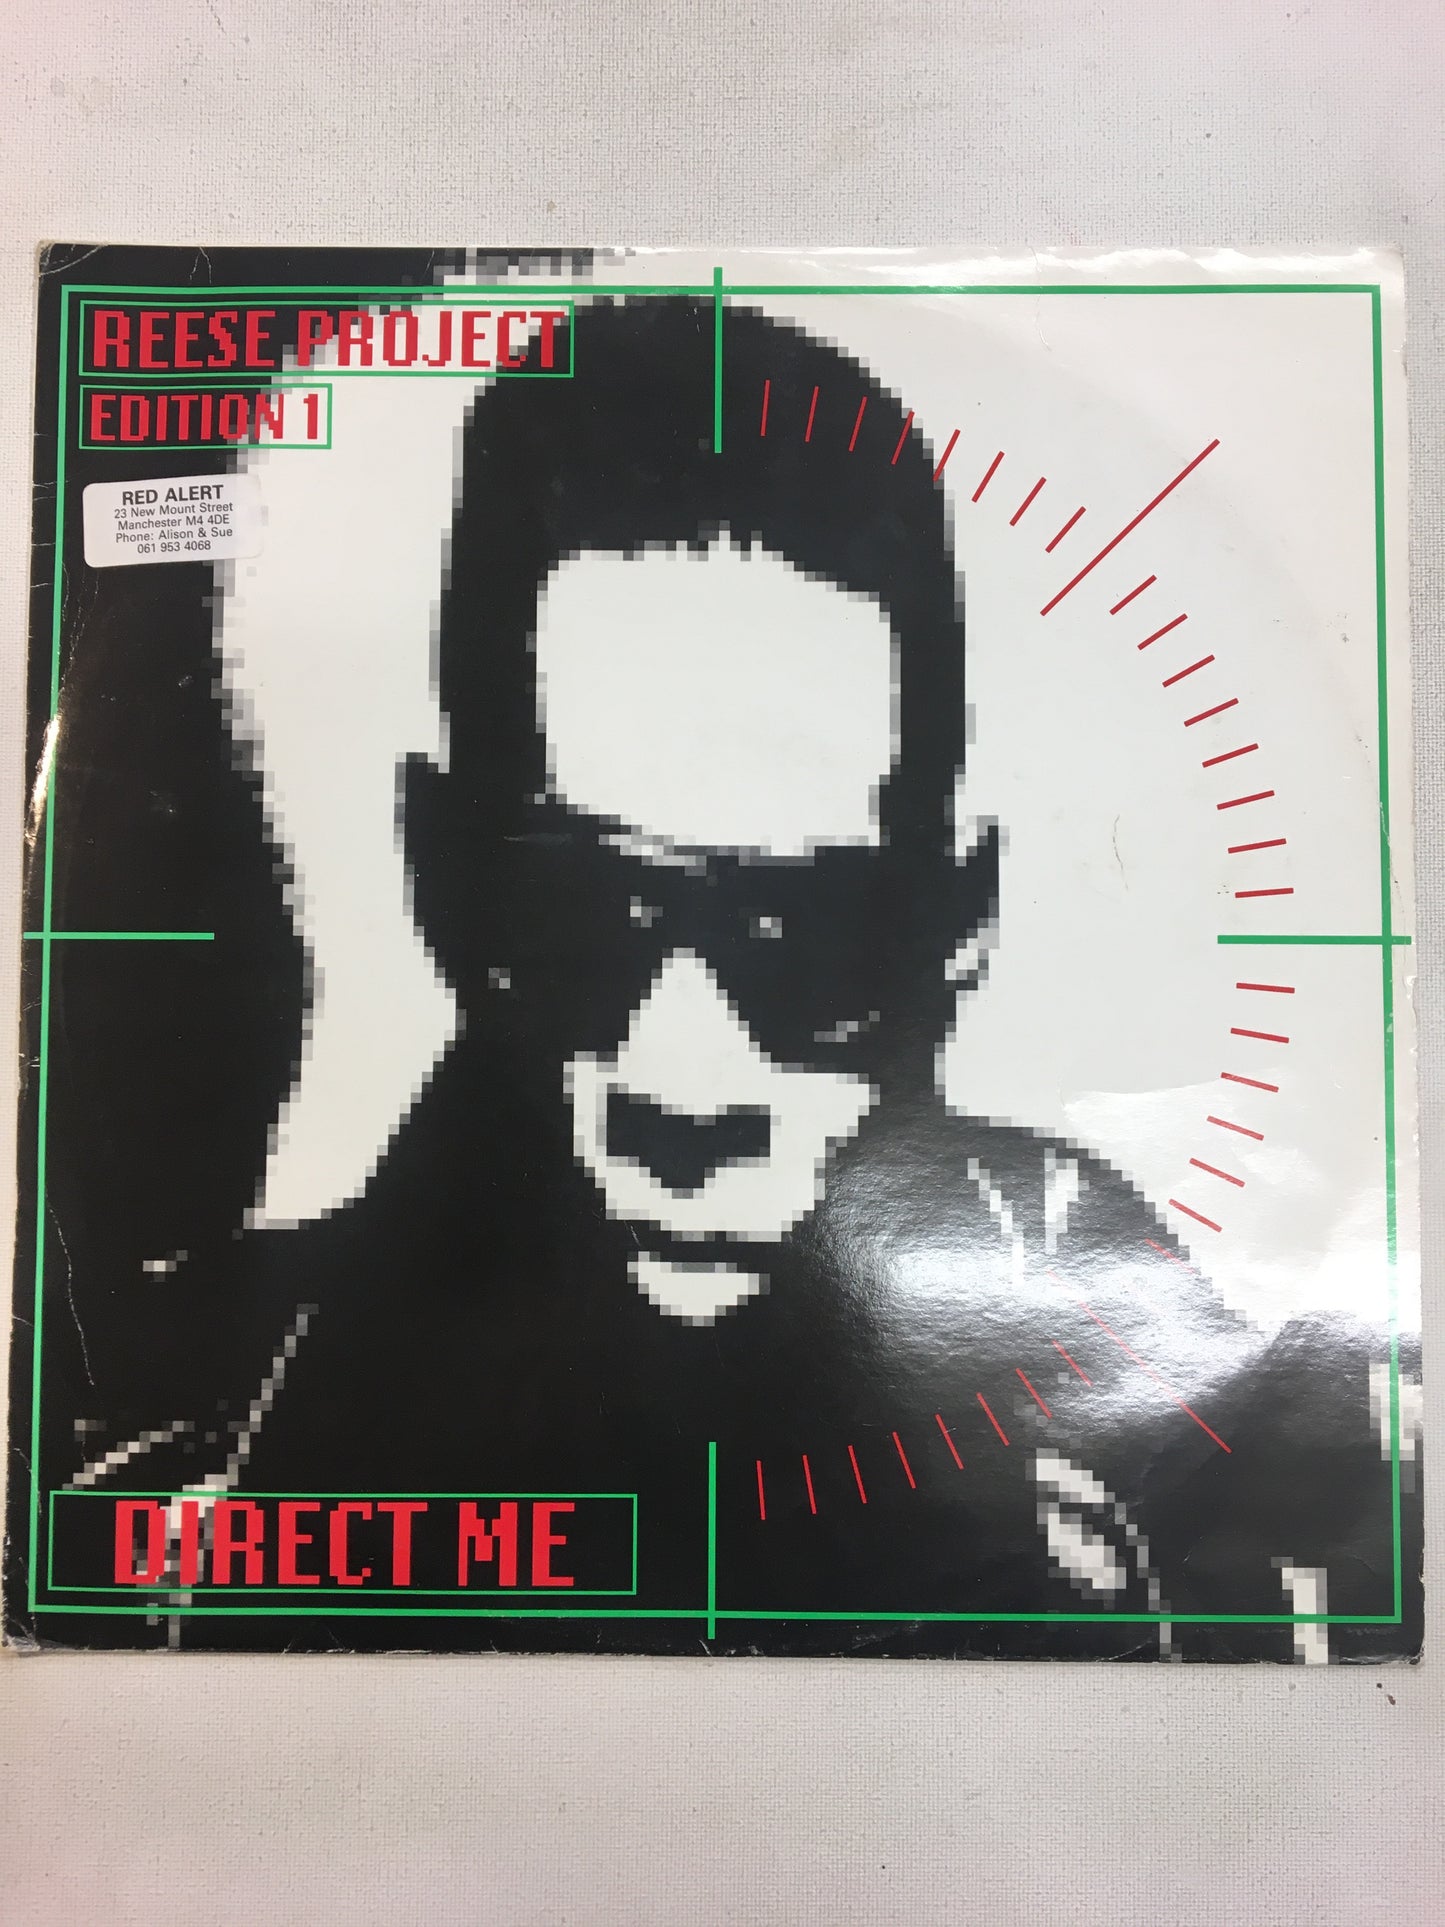 REESE PROJECT EDITION 1 ; 12” - DIRECT ME